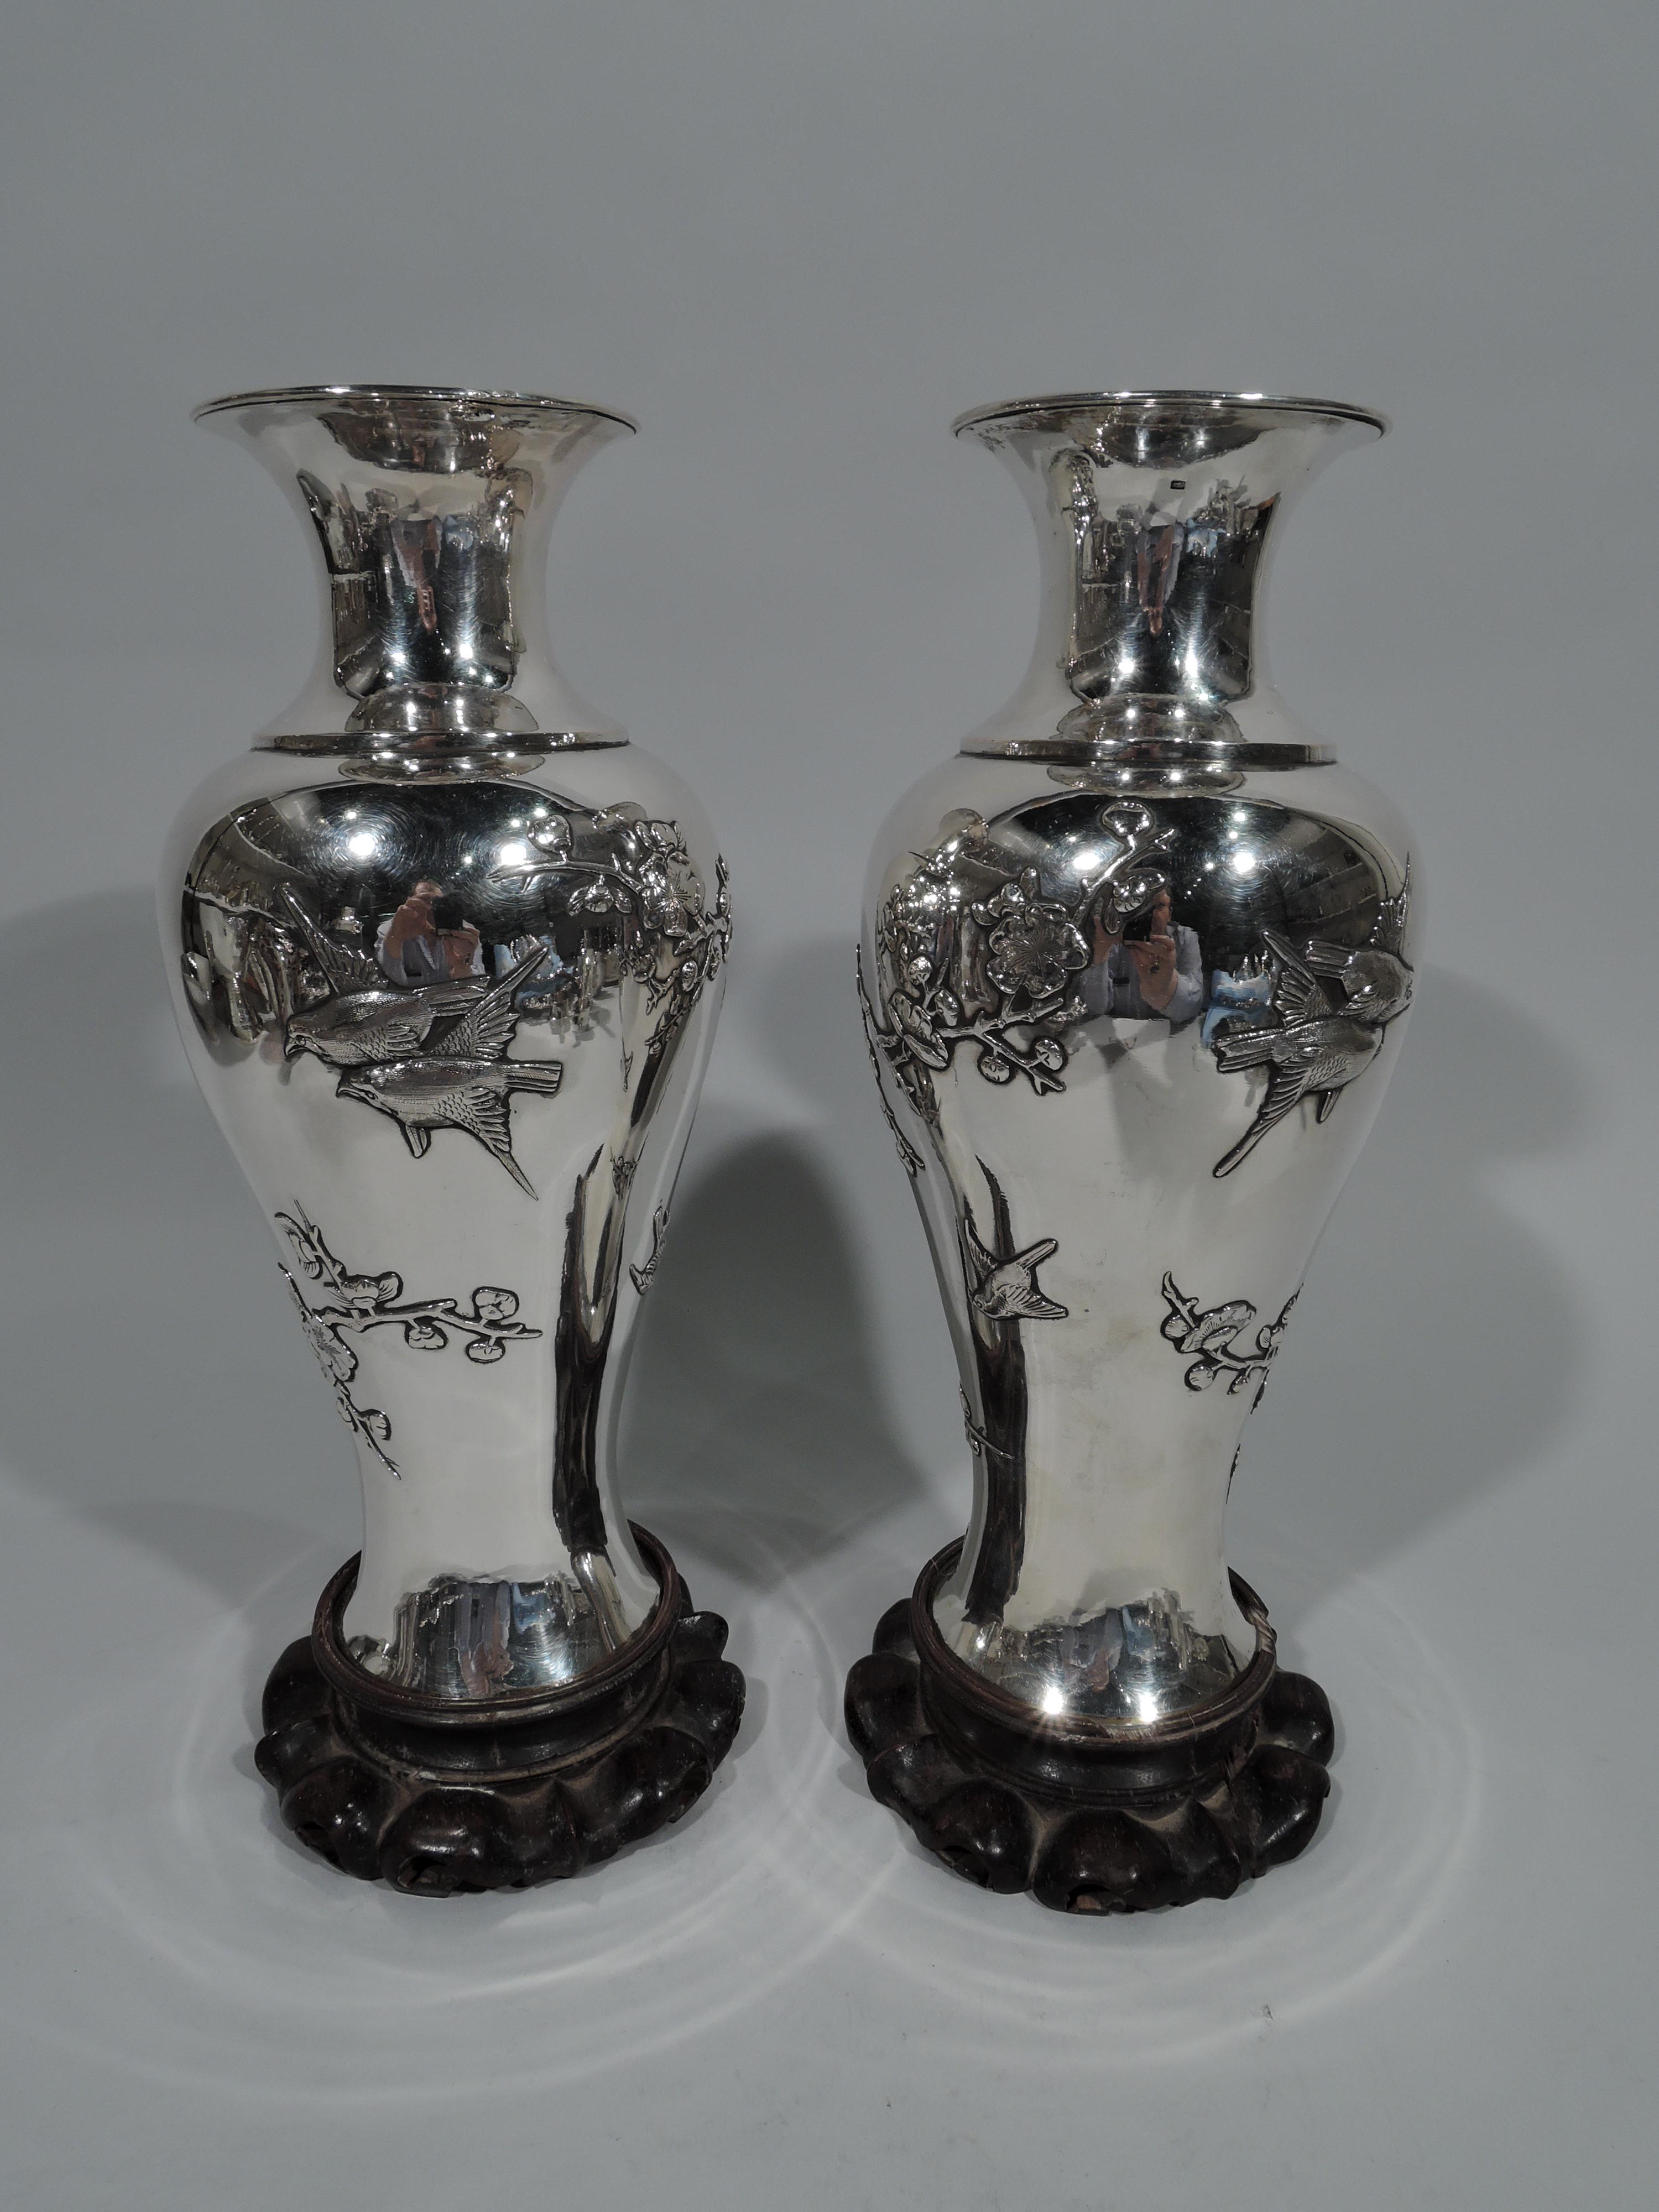 Pair of Chinese silver vases, circa 1900. Each: Baluster with spool neck and flared mouth. Applied and engraved ornament: Winding, craggy blossoming prunus branches and perched and flying birds. Stained rosewood mount. Chinese characters marked on